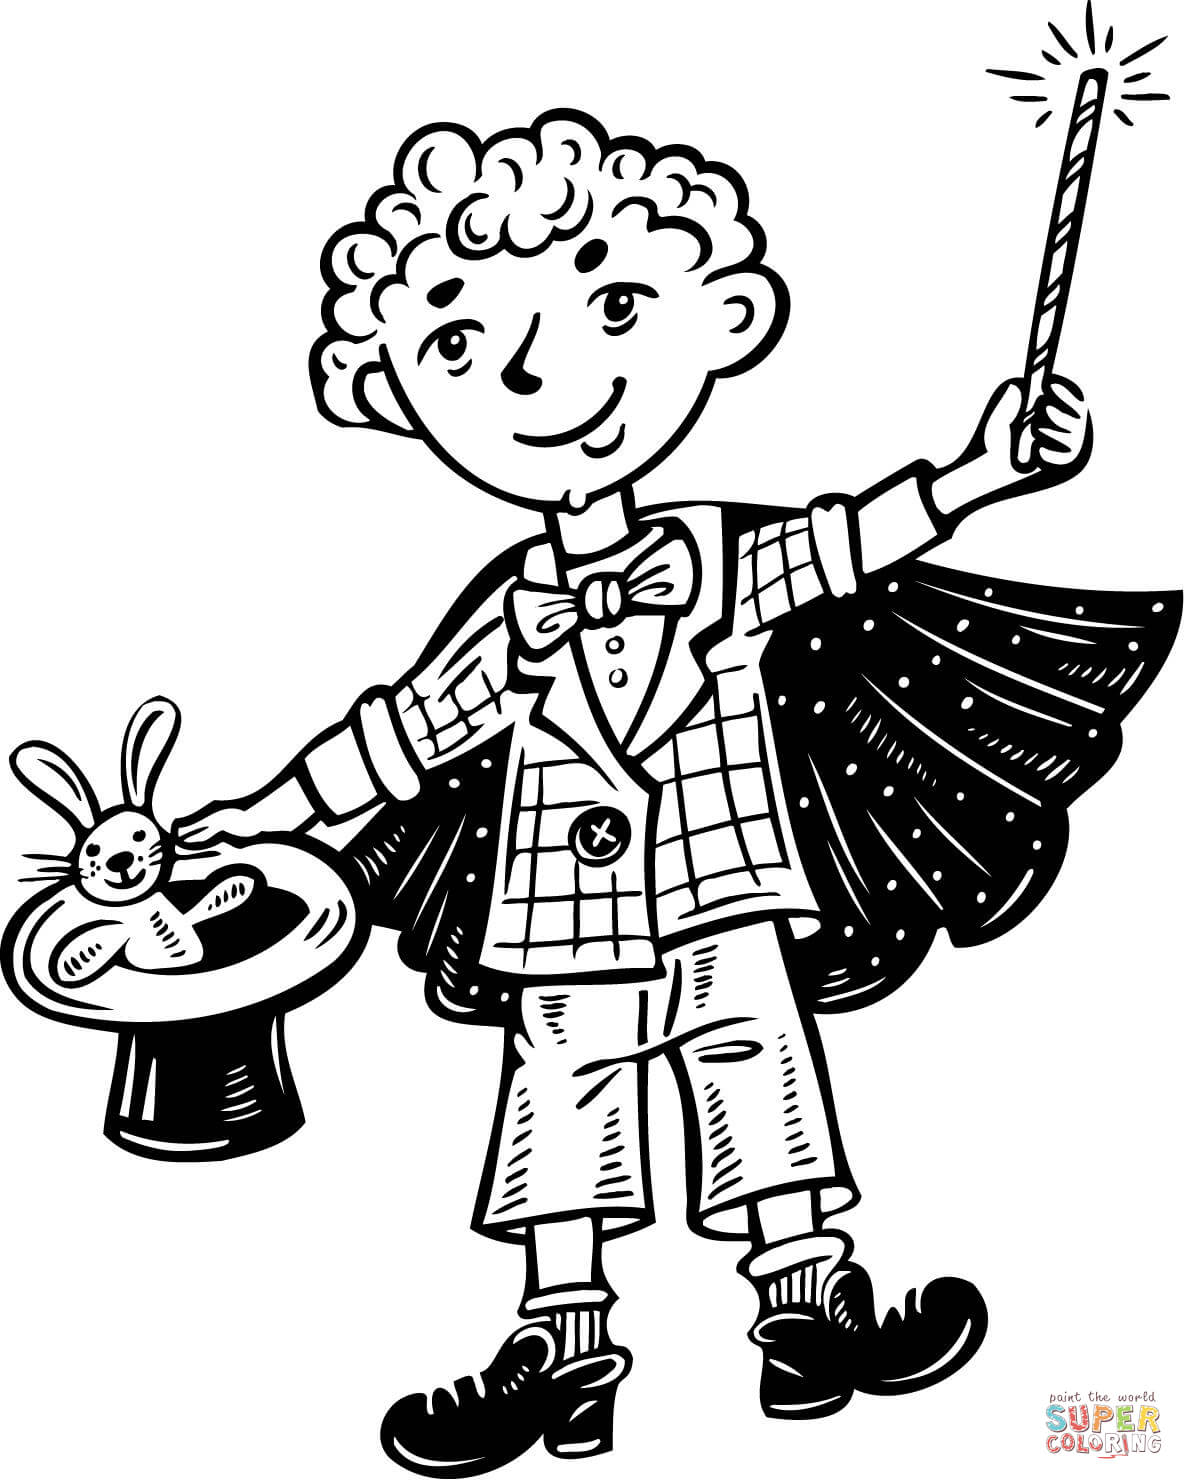 Kid Magician coloring page | Free Printable Coloring Pages